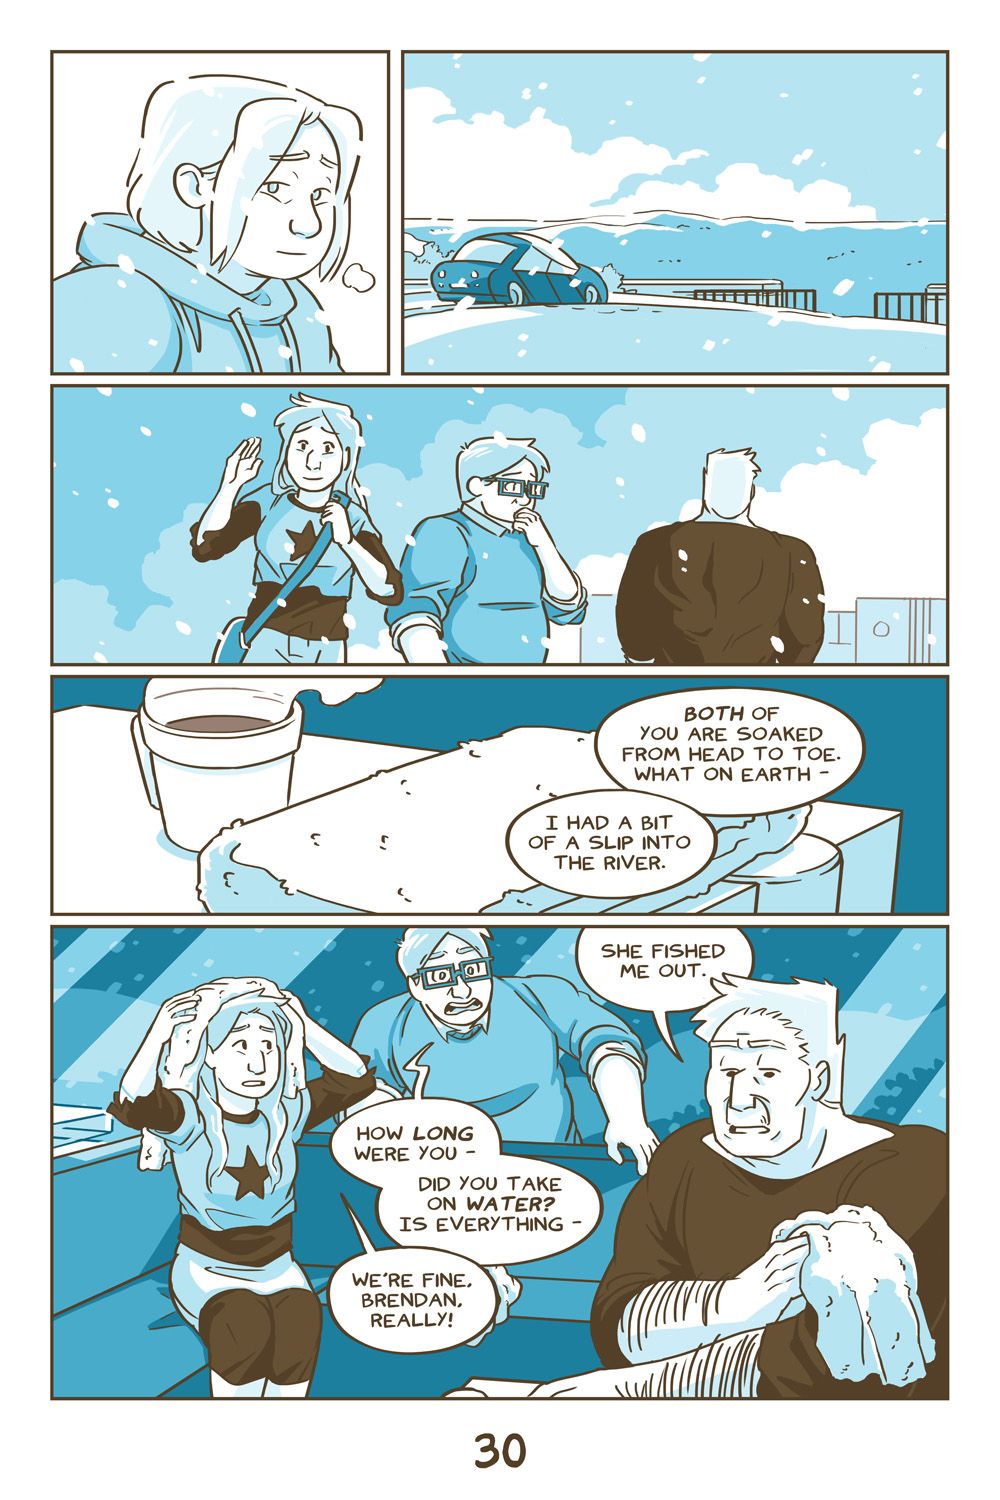 Chapter 7, Page 30